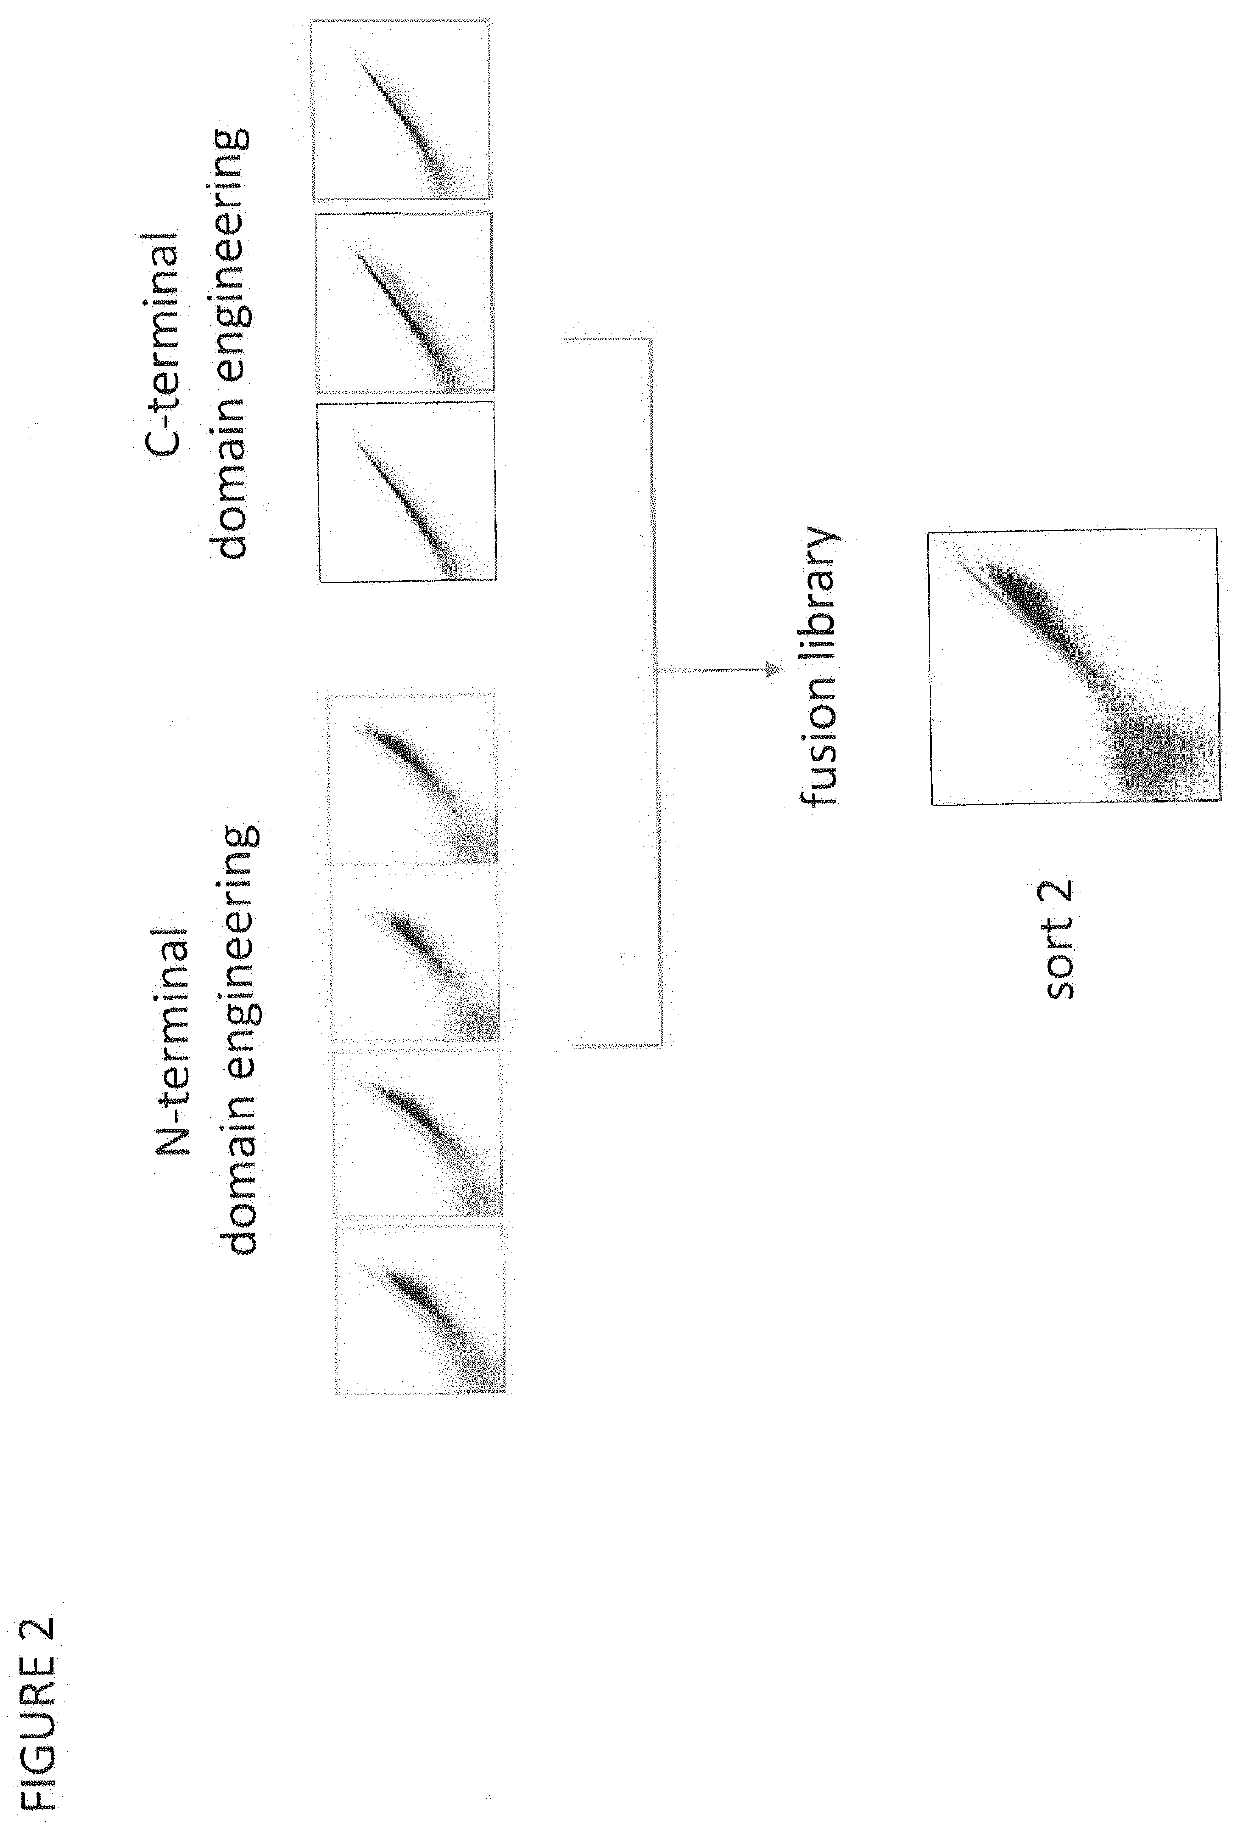 Cblb endonuclease variants, compositions, and methods of use